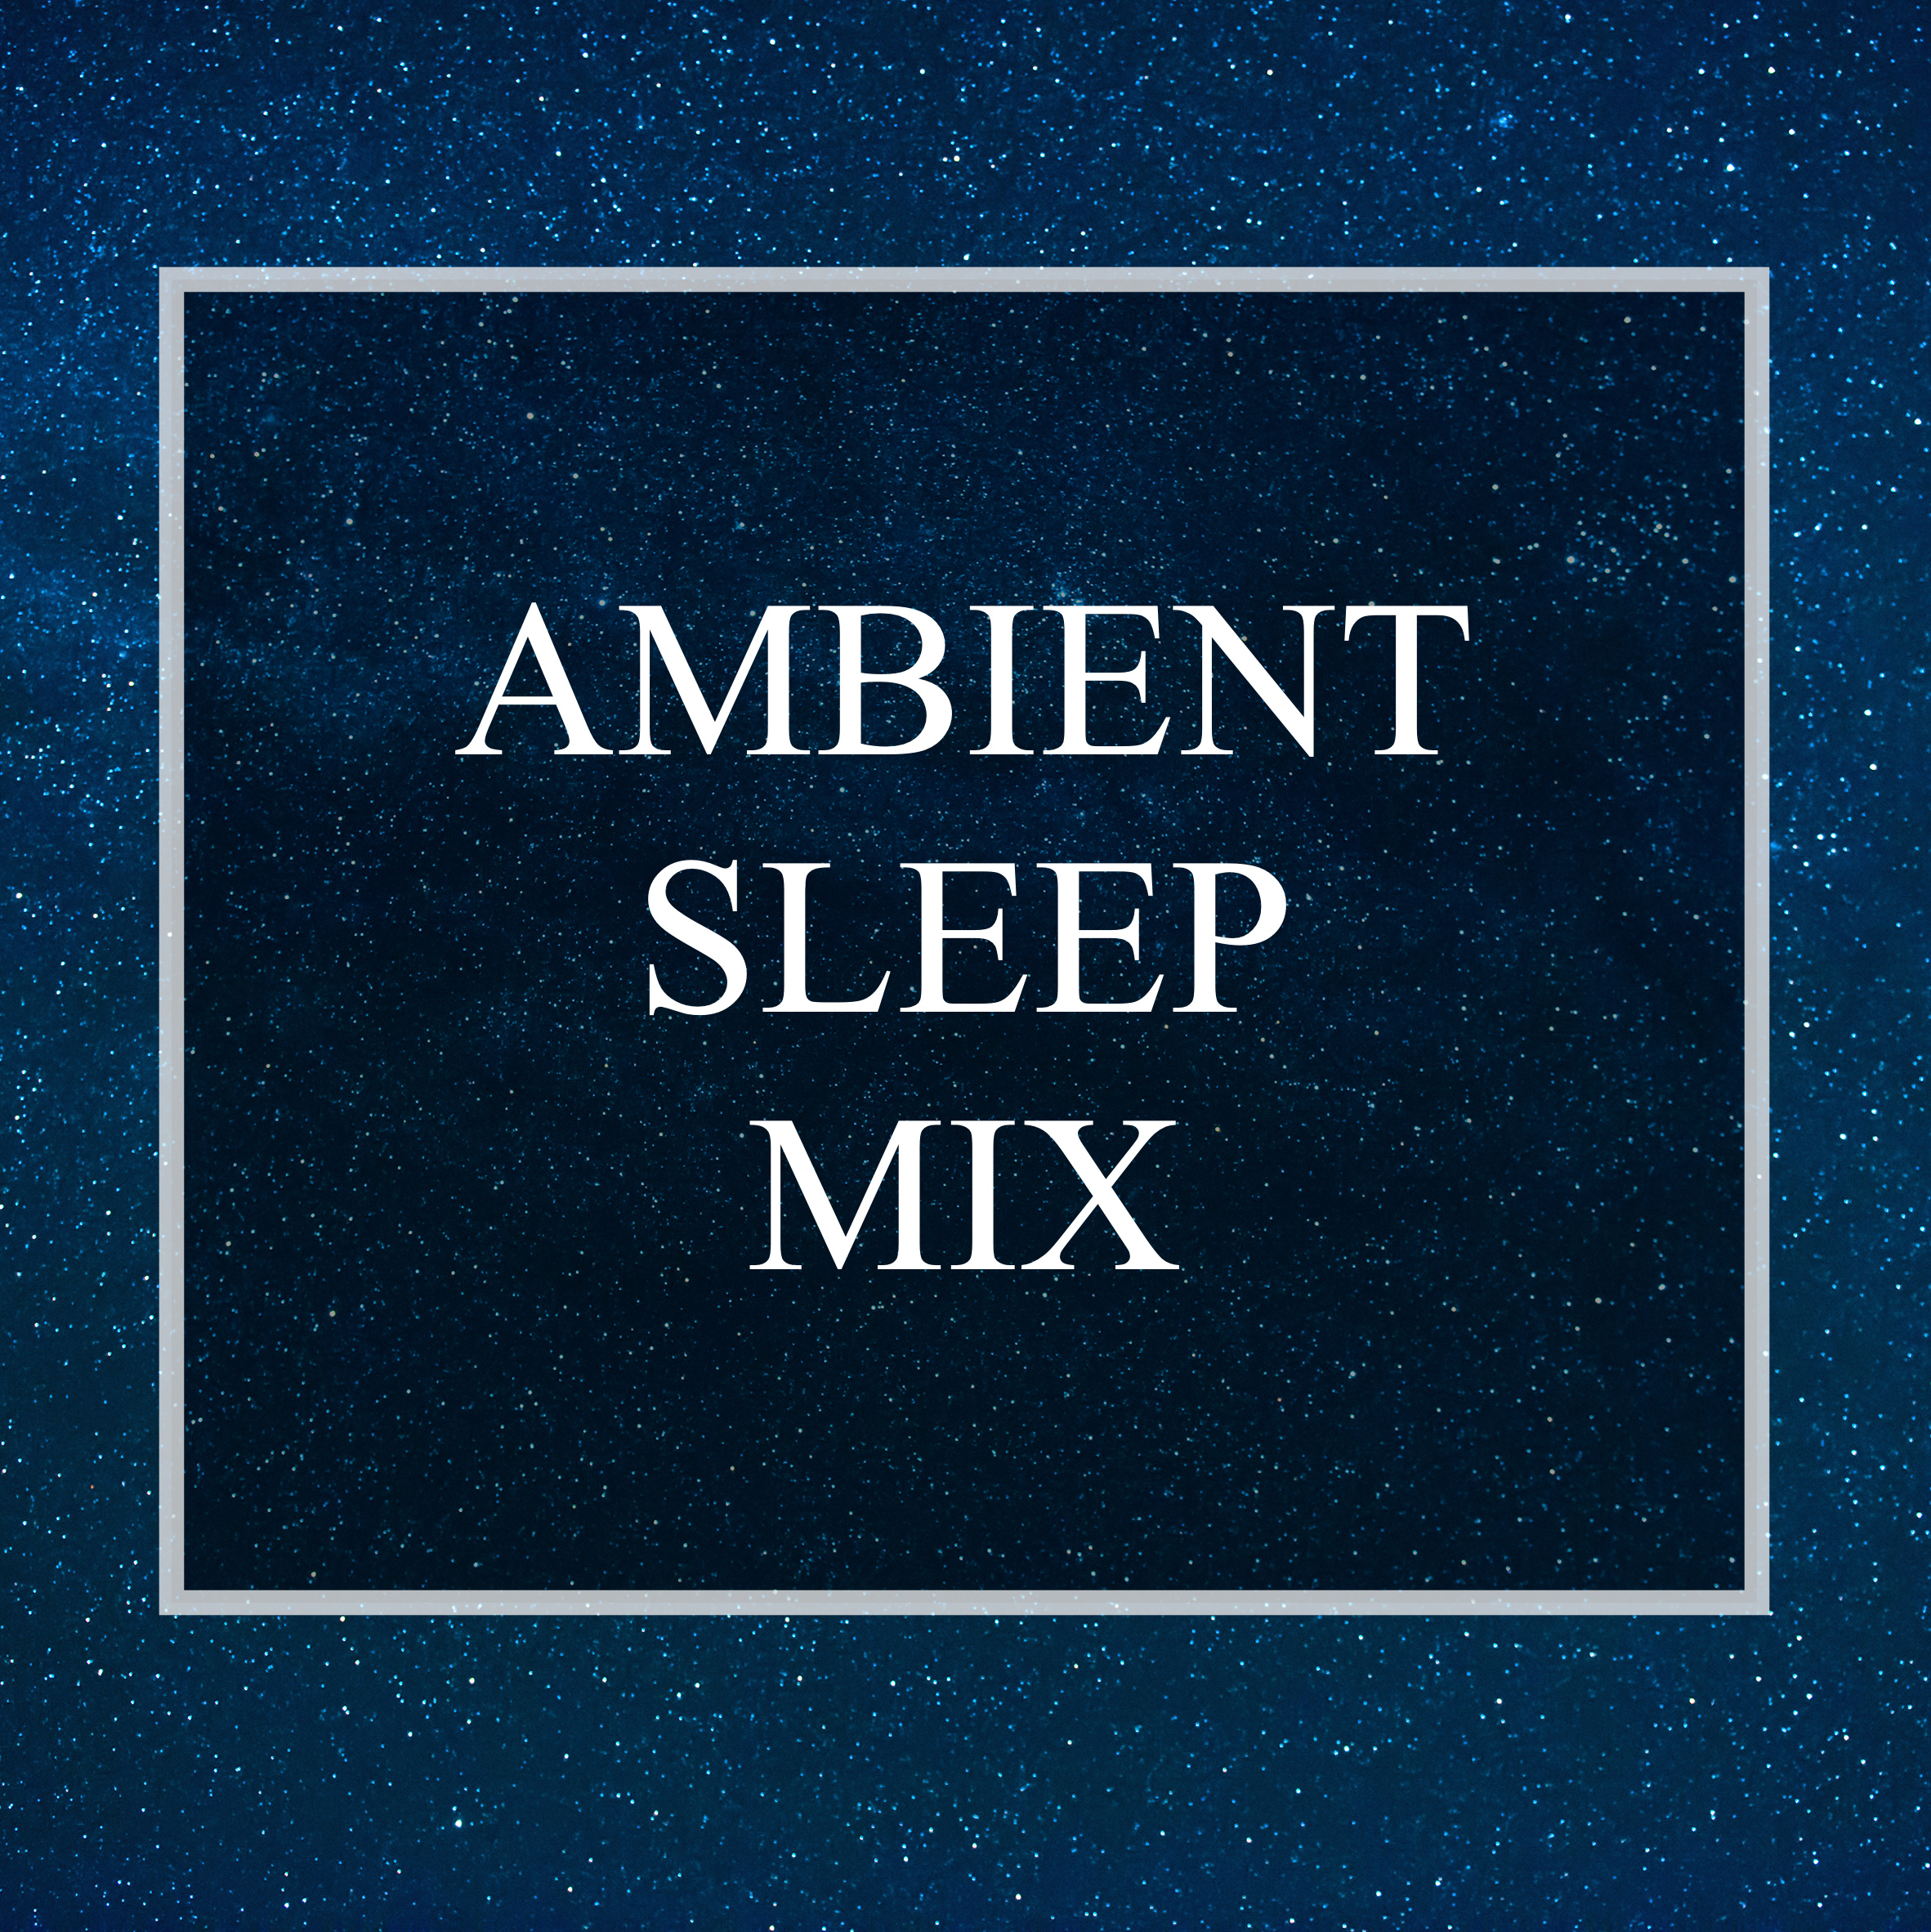 Ambient Sleep Mix - Relaxing Ambience for Mindfulness, Stress-Free Sleep, Anxiety Relief and Mindfulness